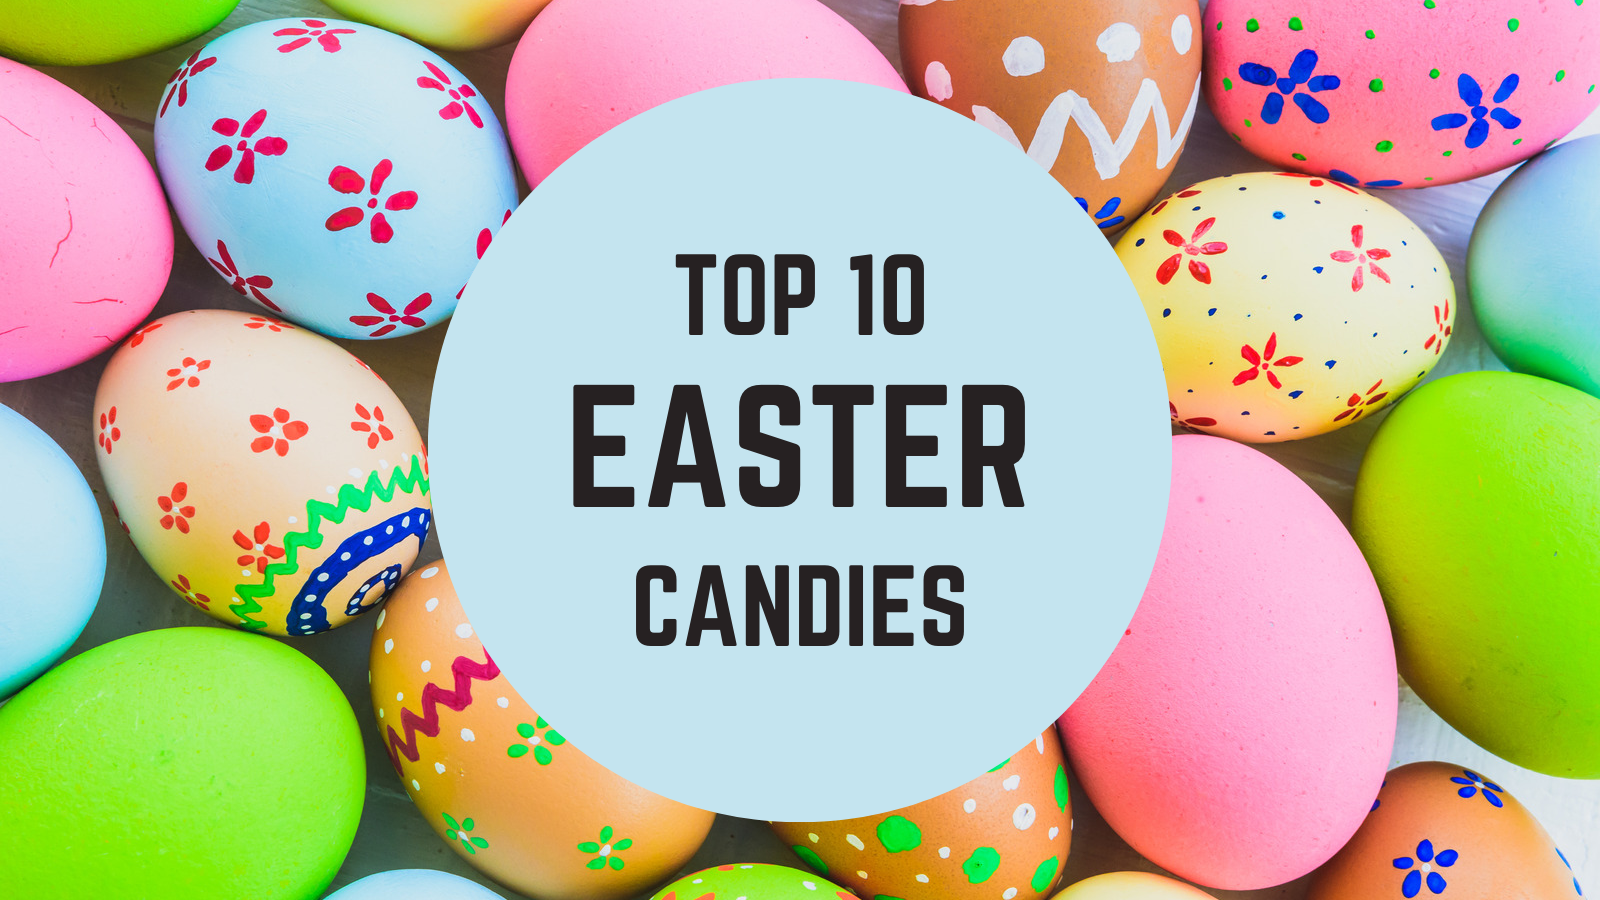 The Top 10 Easter Candies